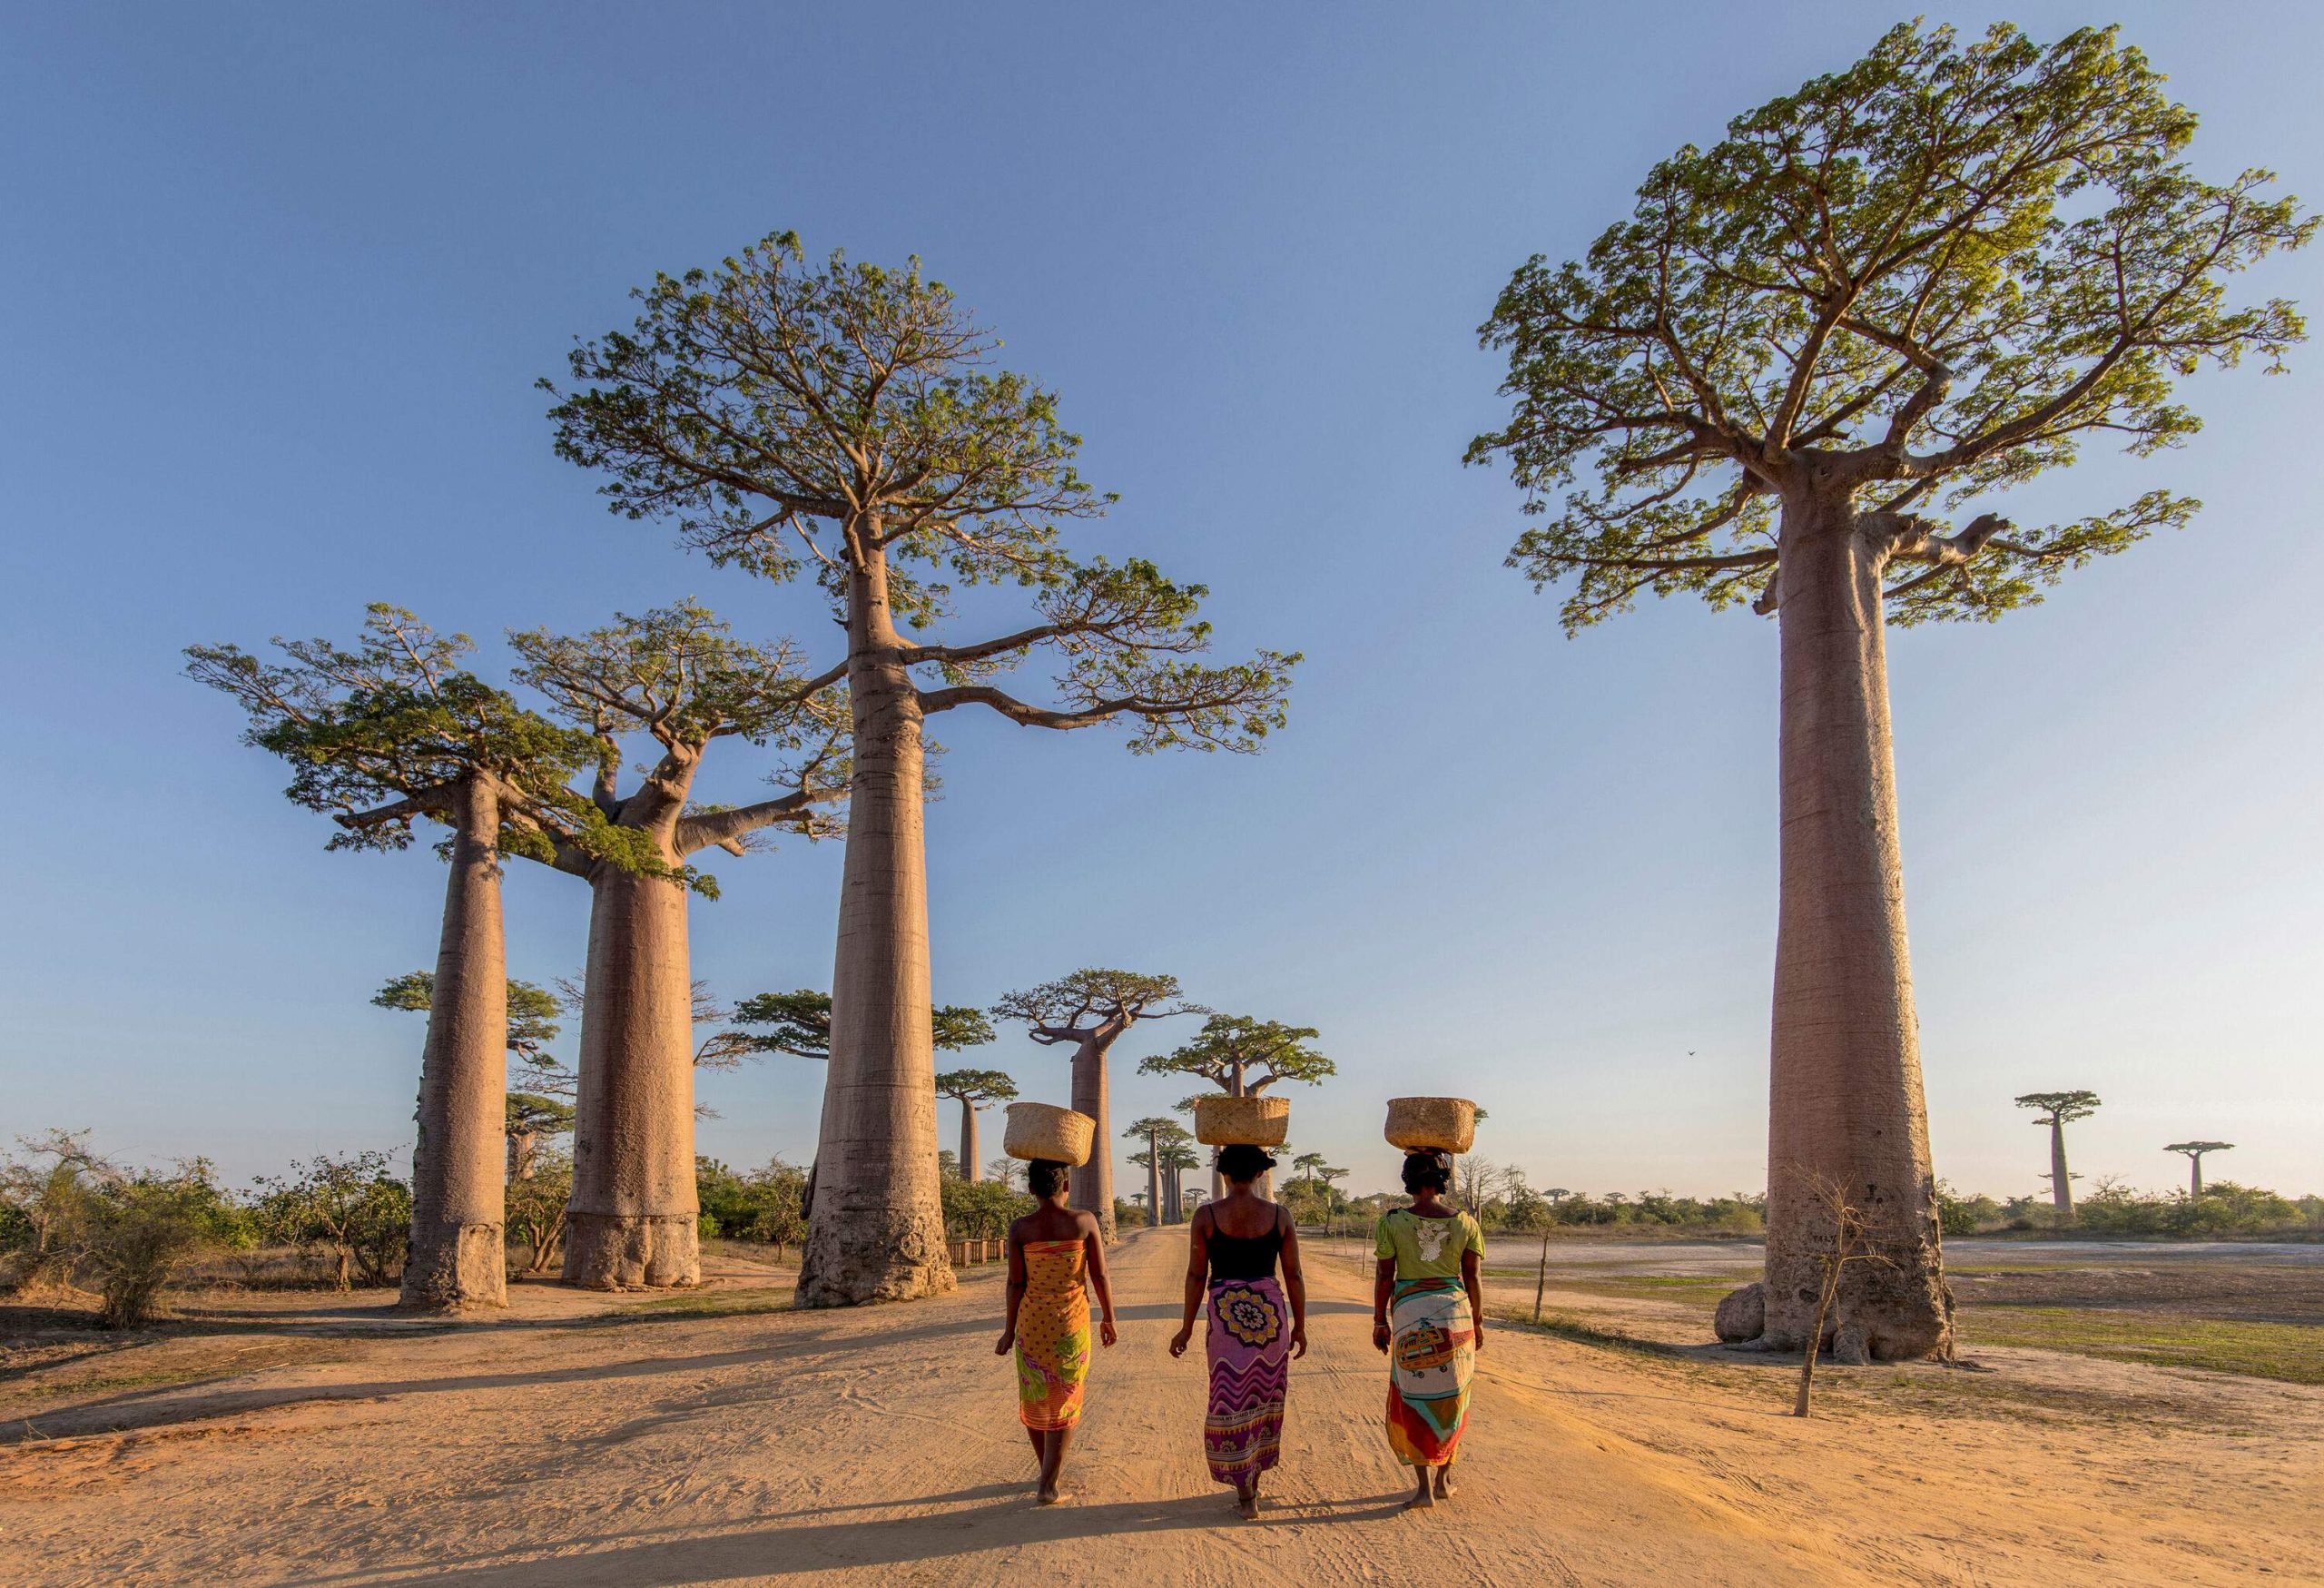 Three female locals carrying woven baskets on their heads walk on the sandy road between the large baobab trees.